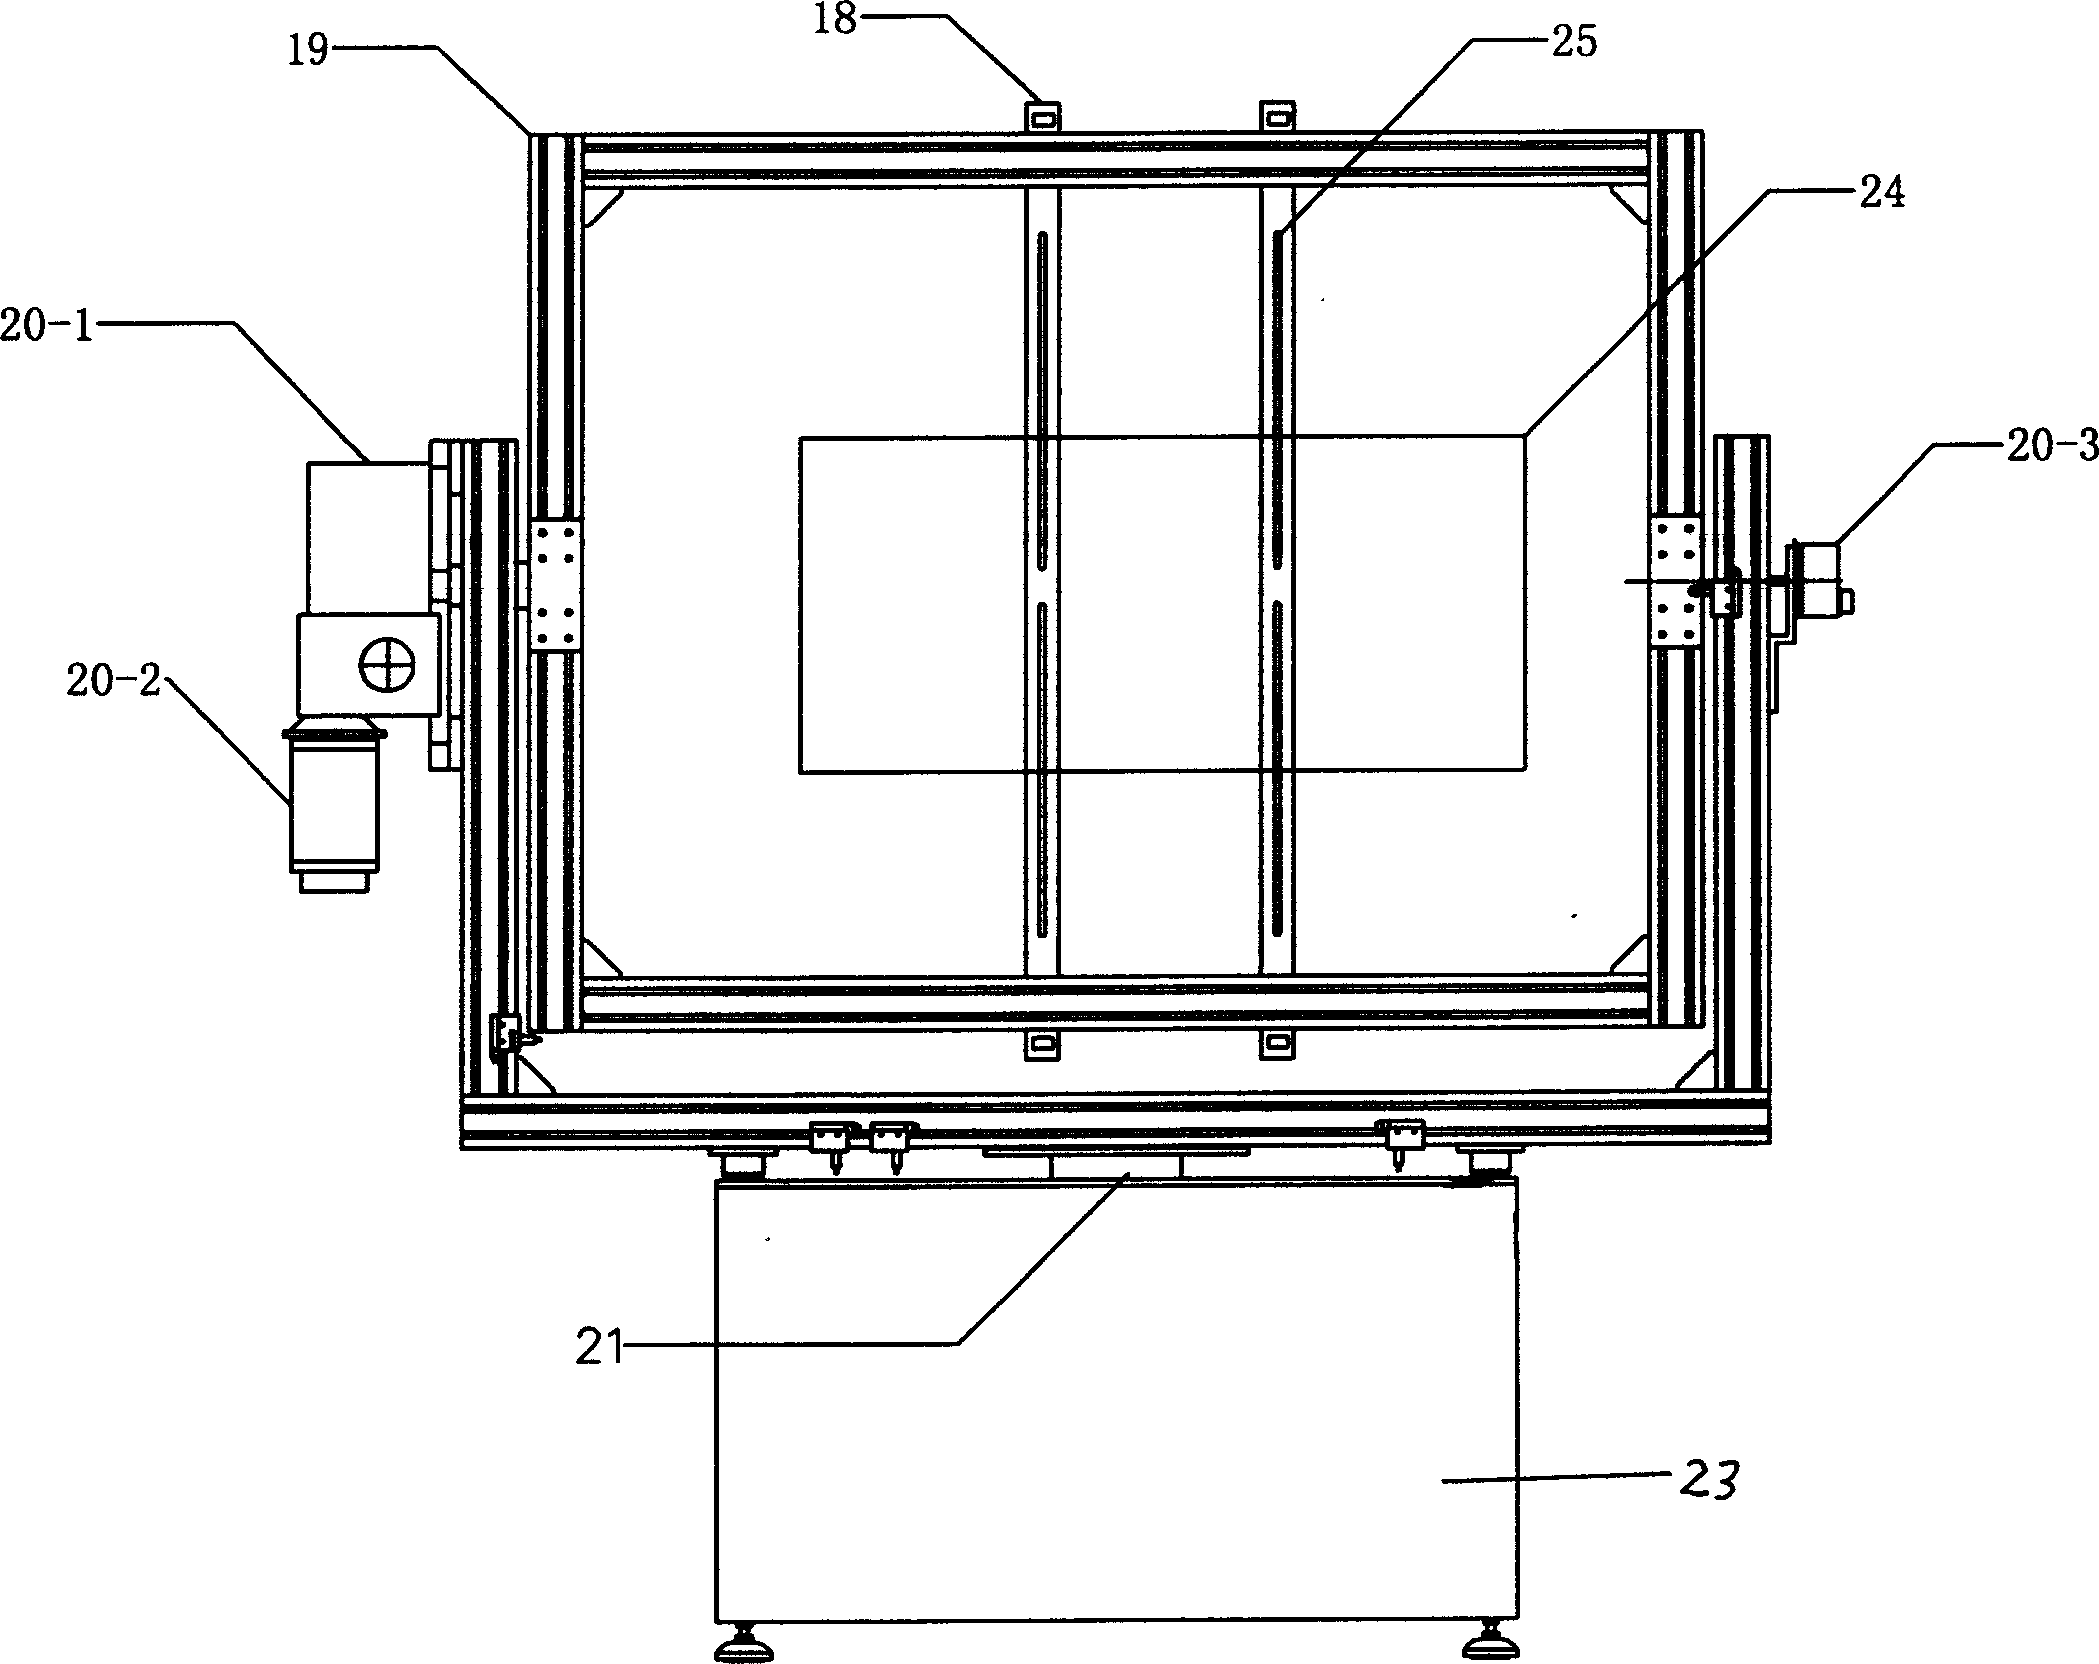 Automatic measuring system for visual angle of liquid crystal display